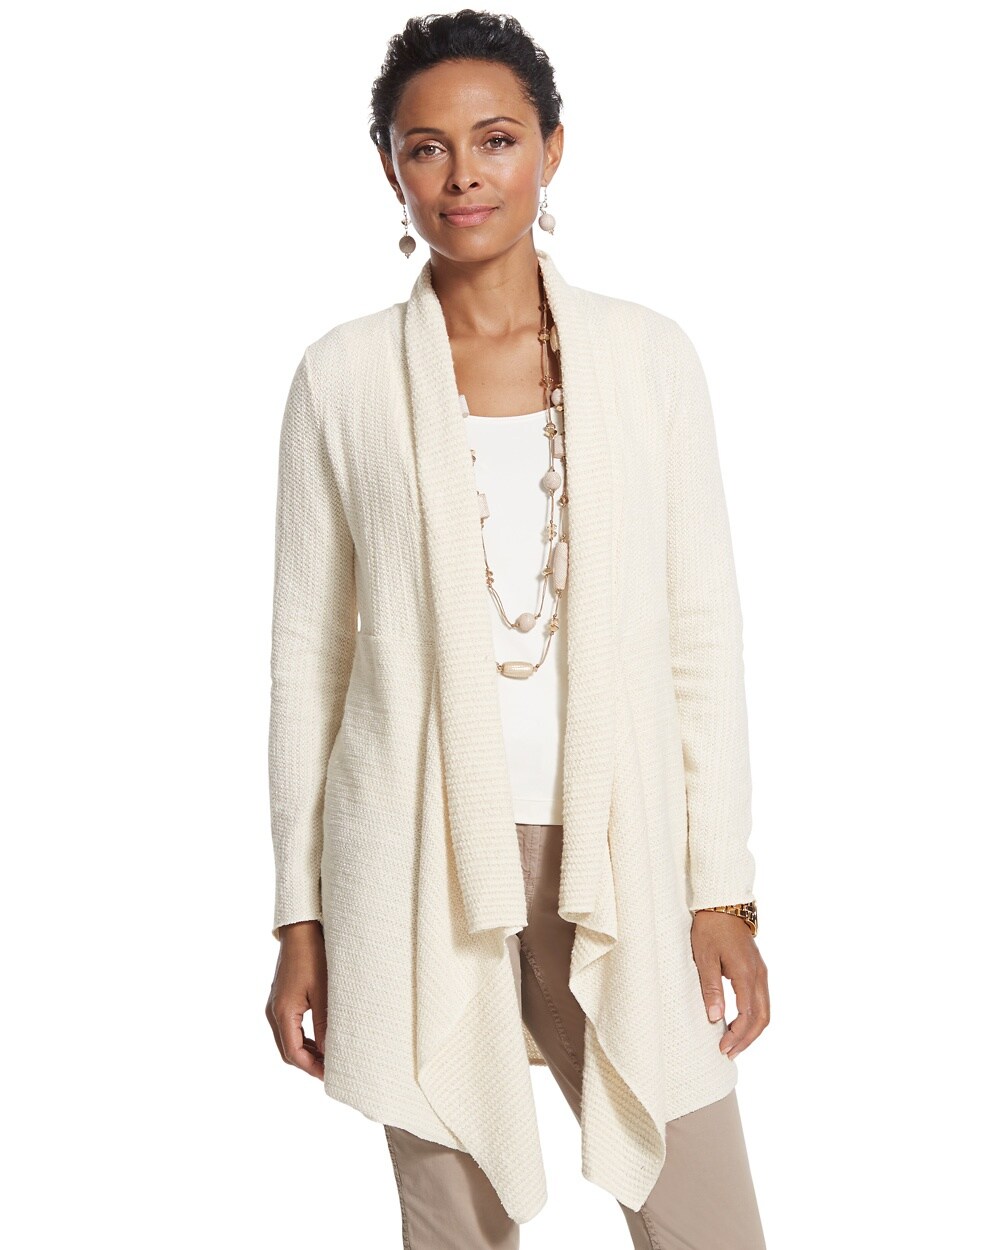 Colleen Draped Shimmer Cardigan Sweater